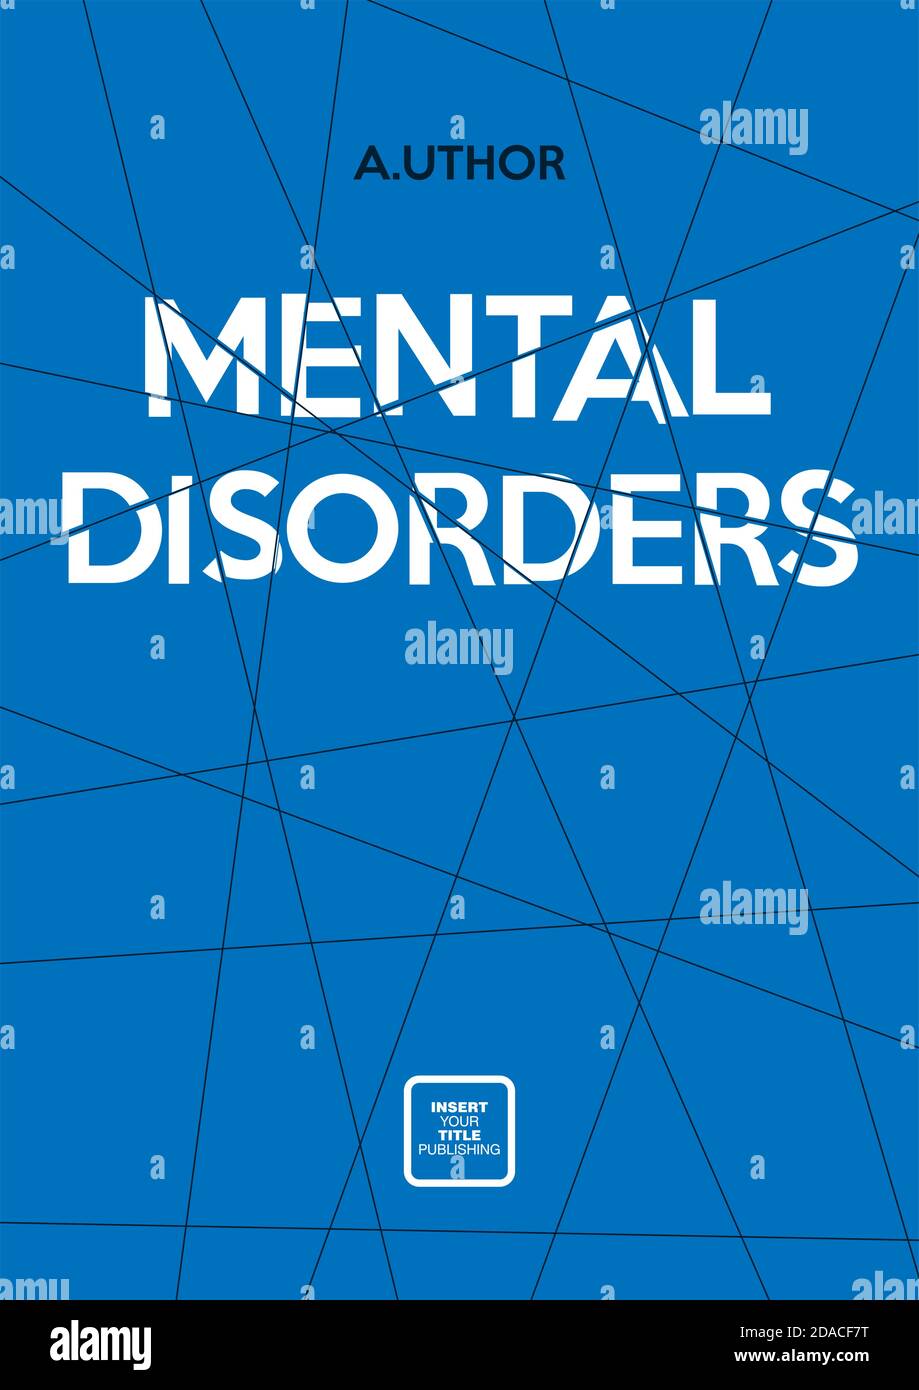 The phrase Mental Disorders is divided by pieces. Book cover creative concept. Psychology or mental health themes. Mid century style design. Stock Vector